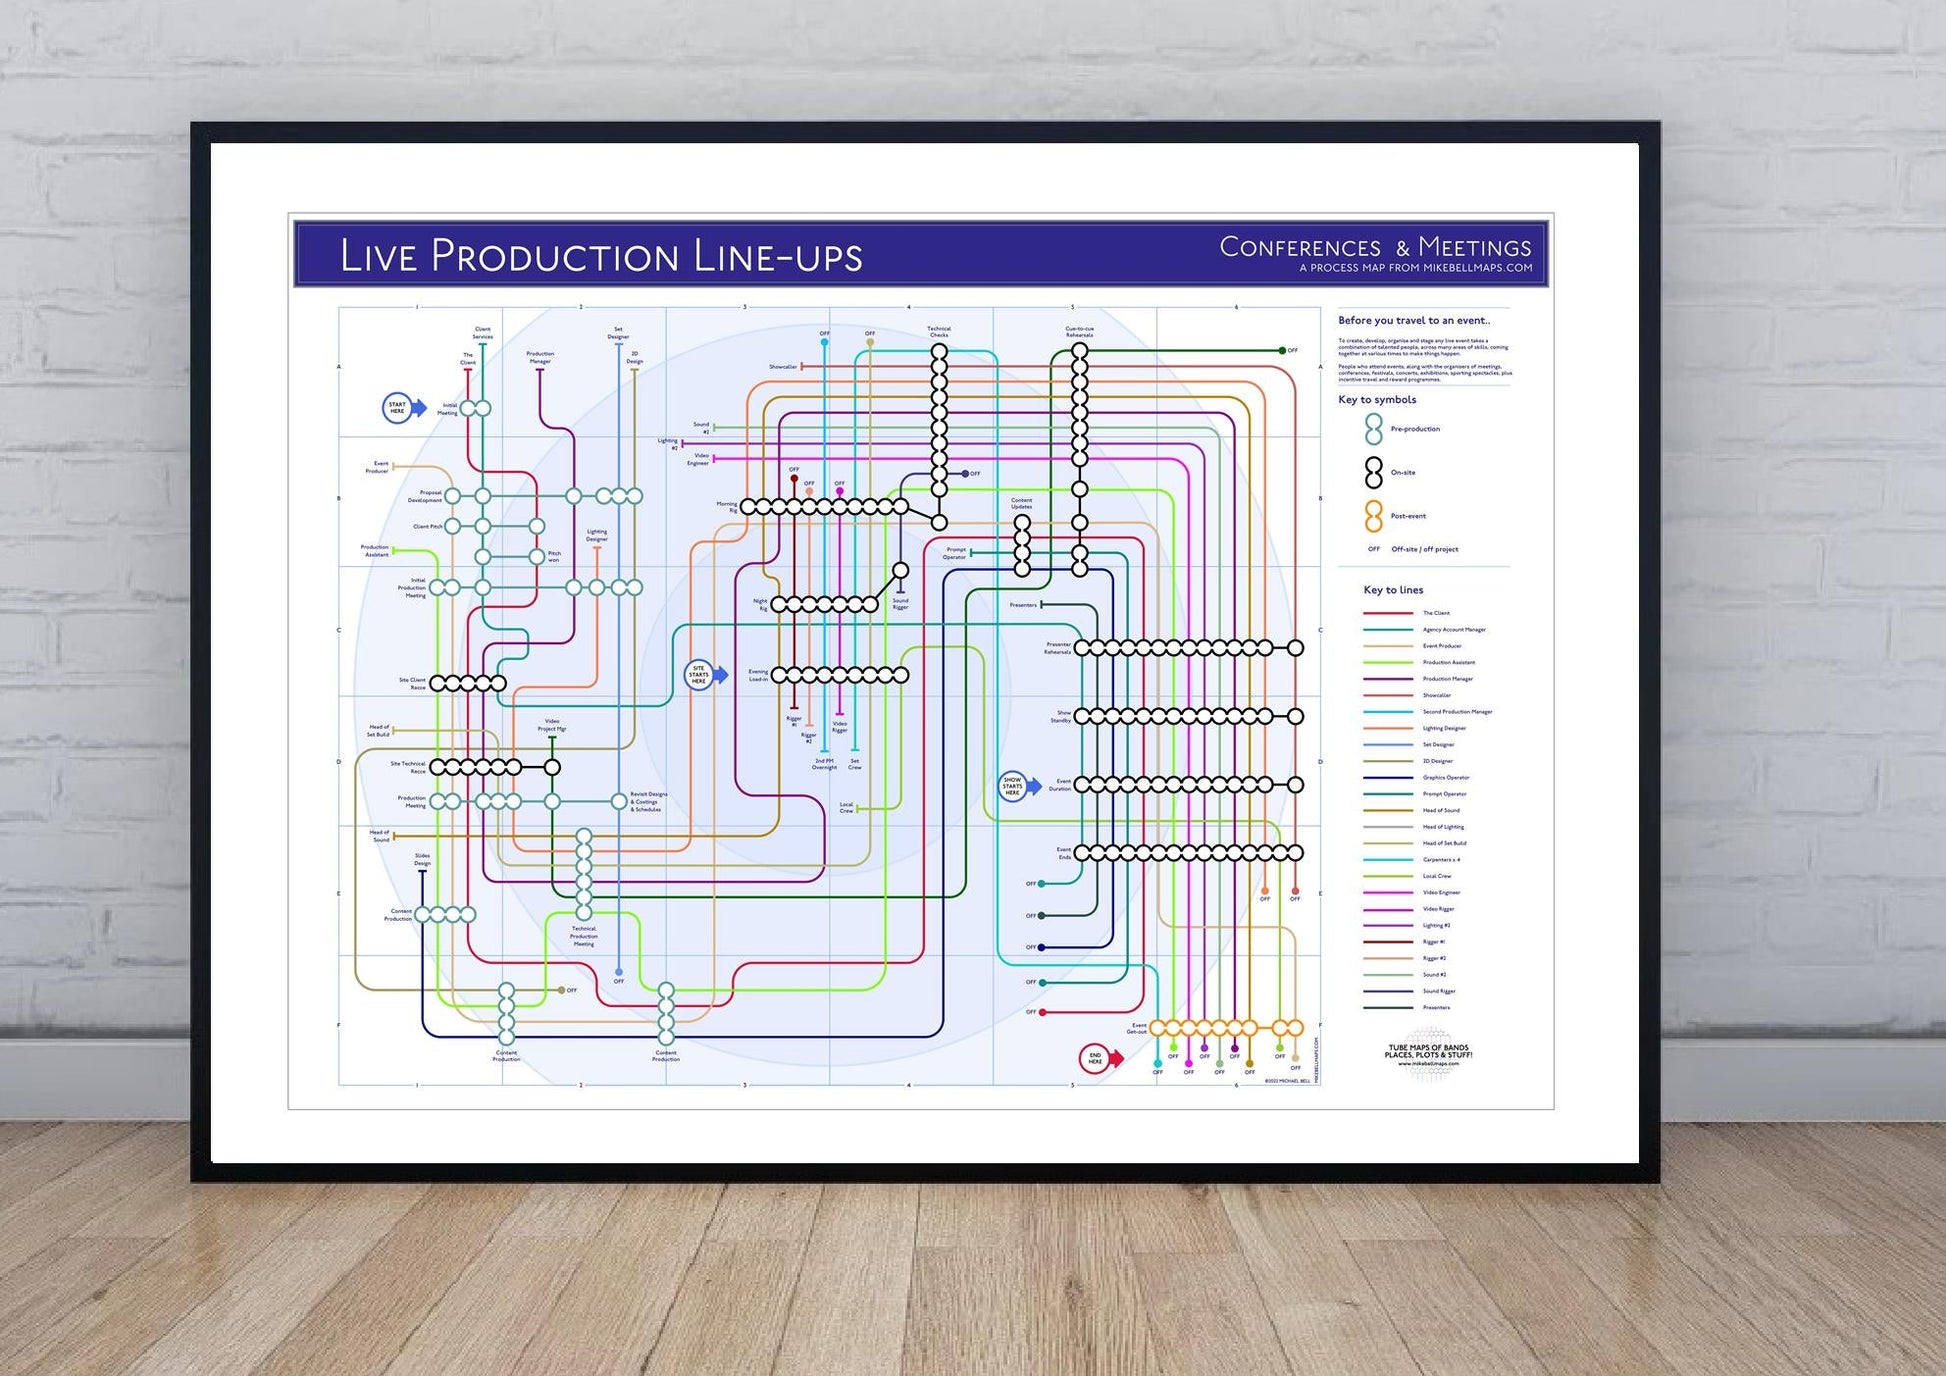 Conference & Event Production - as Tube / Underground Maps - MikeBellMaps.com | MikeBellMaps